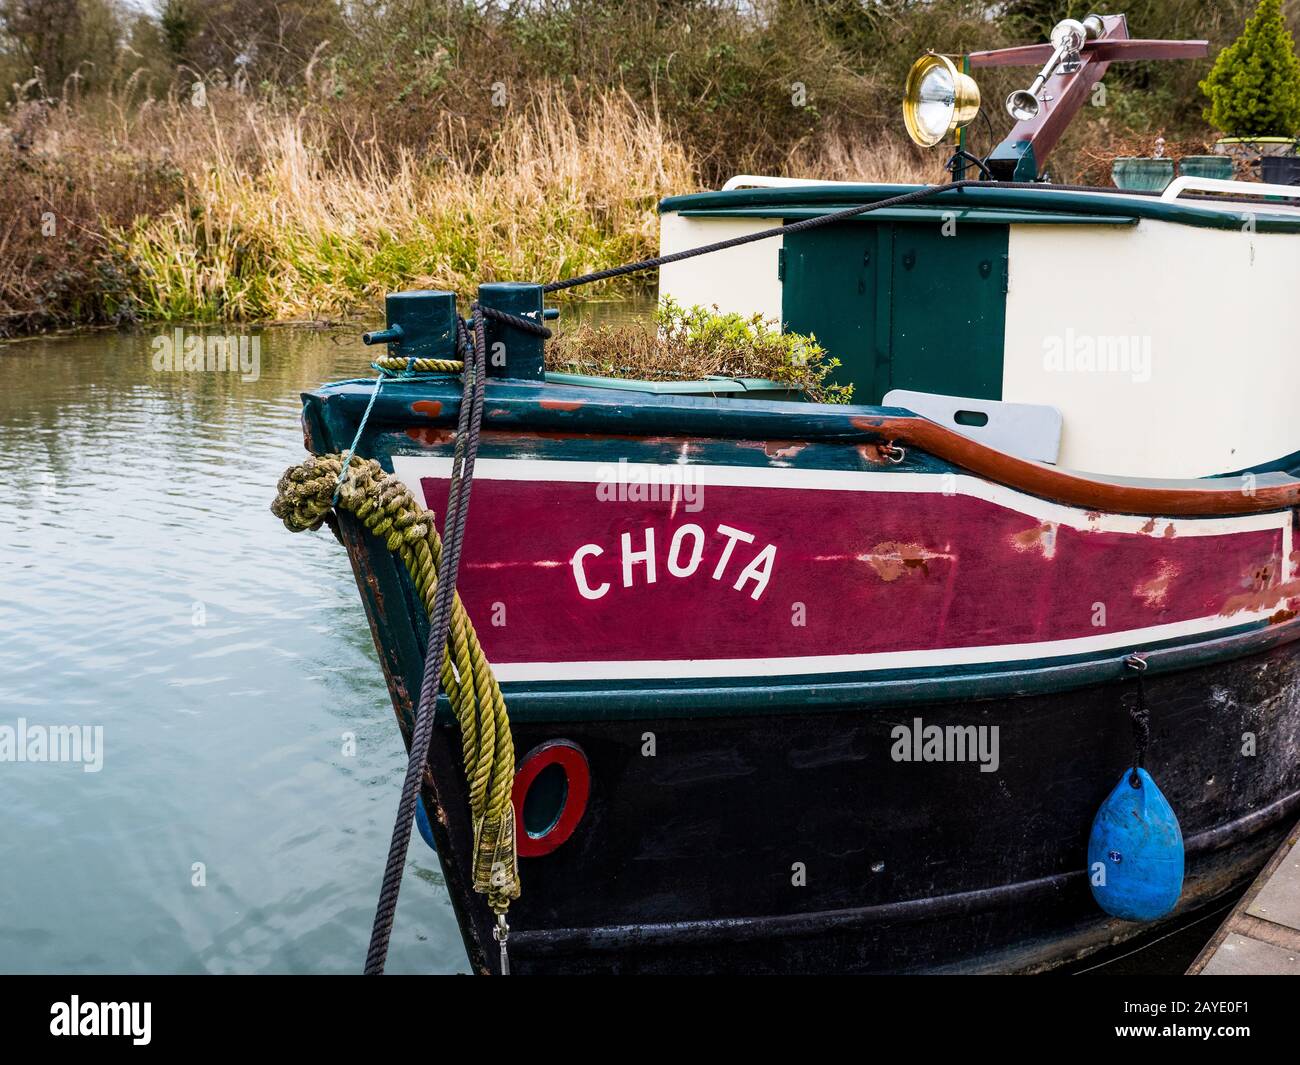 Chota Boat, on Kennet and Avon Canal, Hungerford, Berkshire, England, UK, GB. Stock Photo